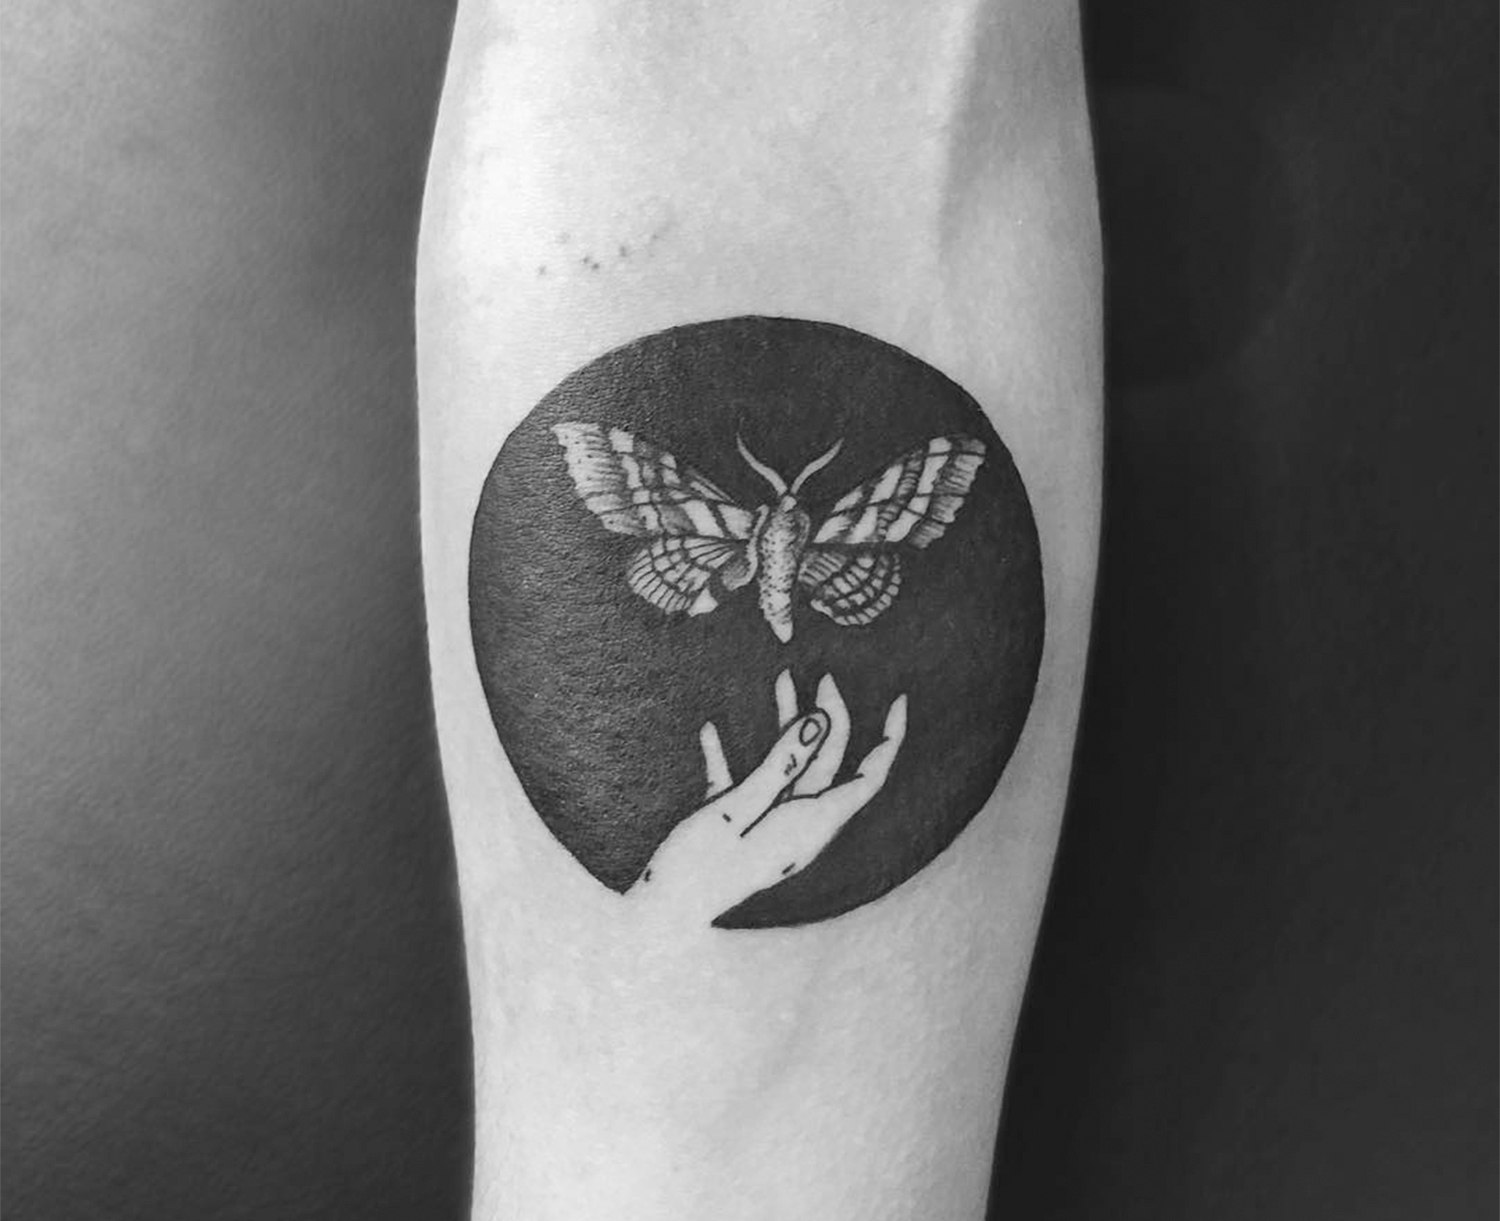 hand and moth, negative space tattoo by Tomtom Tattoos